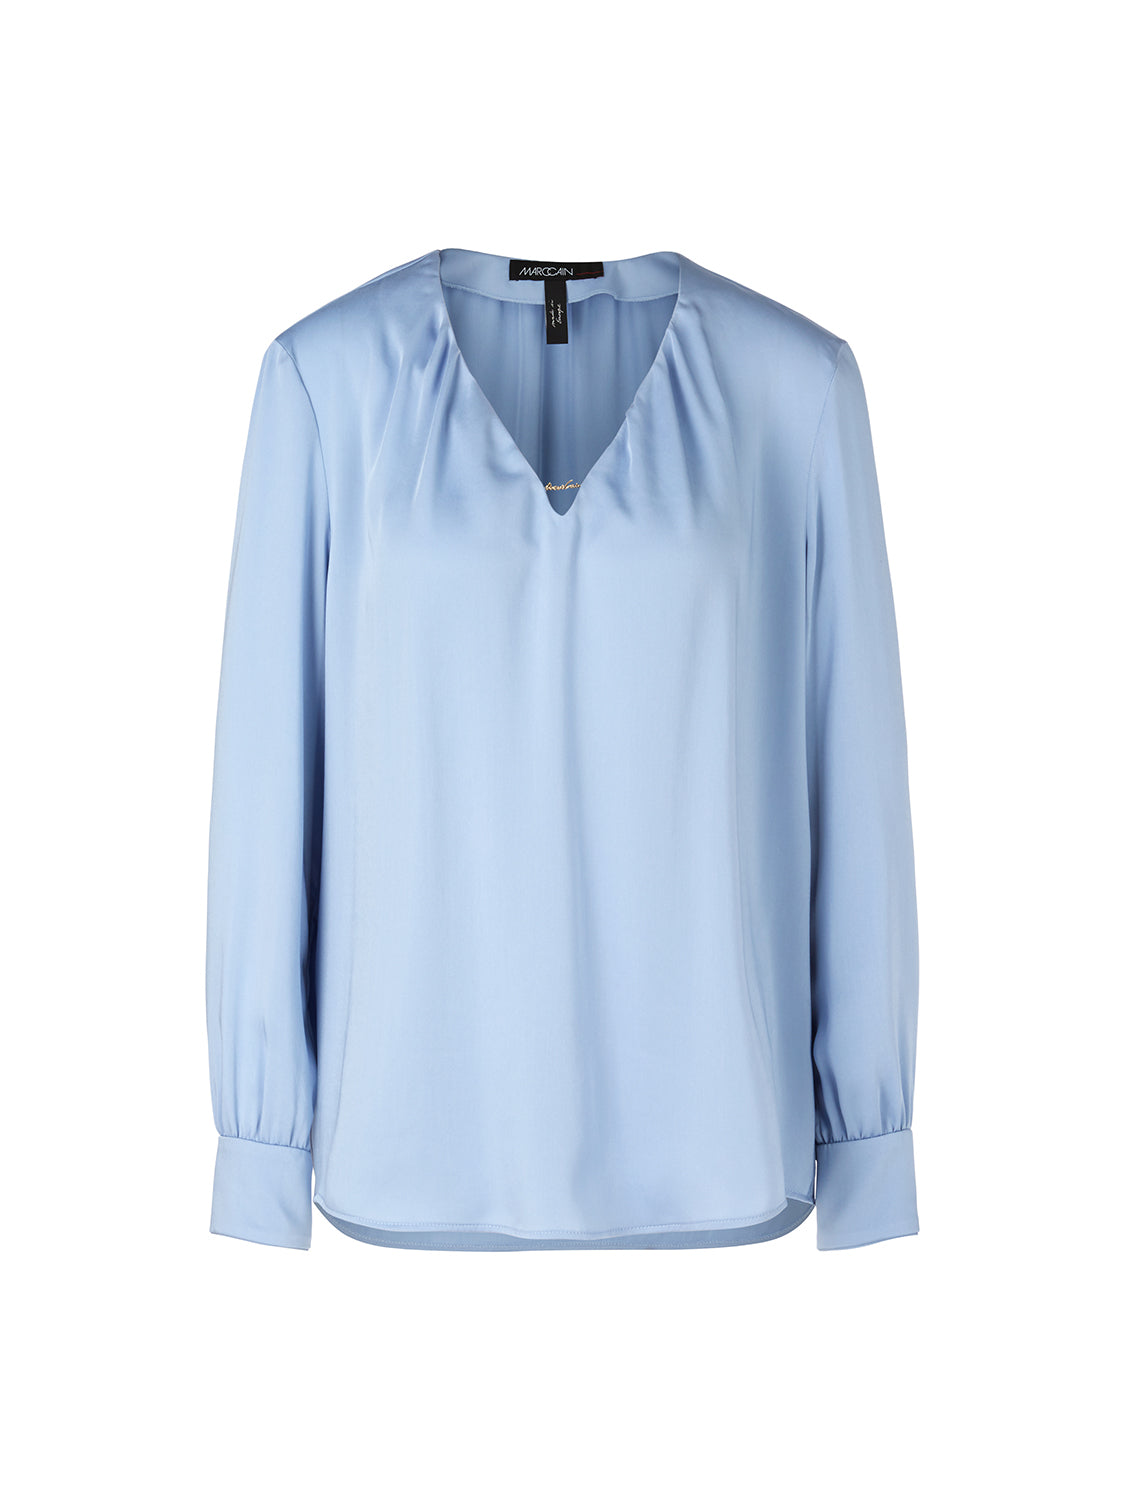 MarcCain Casual blouse with V-neck VC 51.11 W08